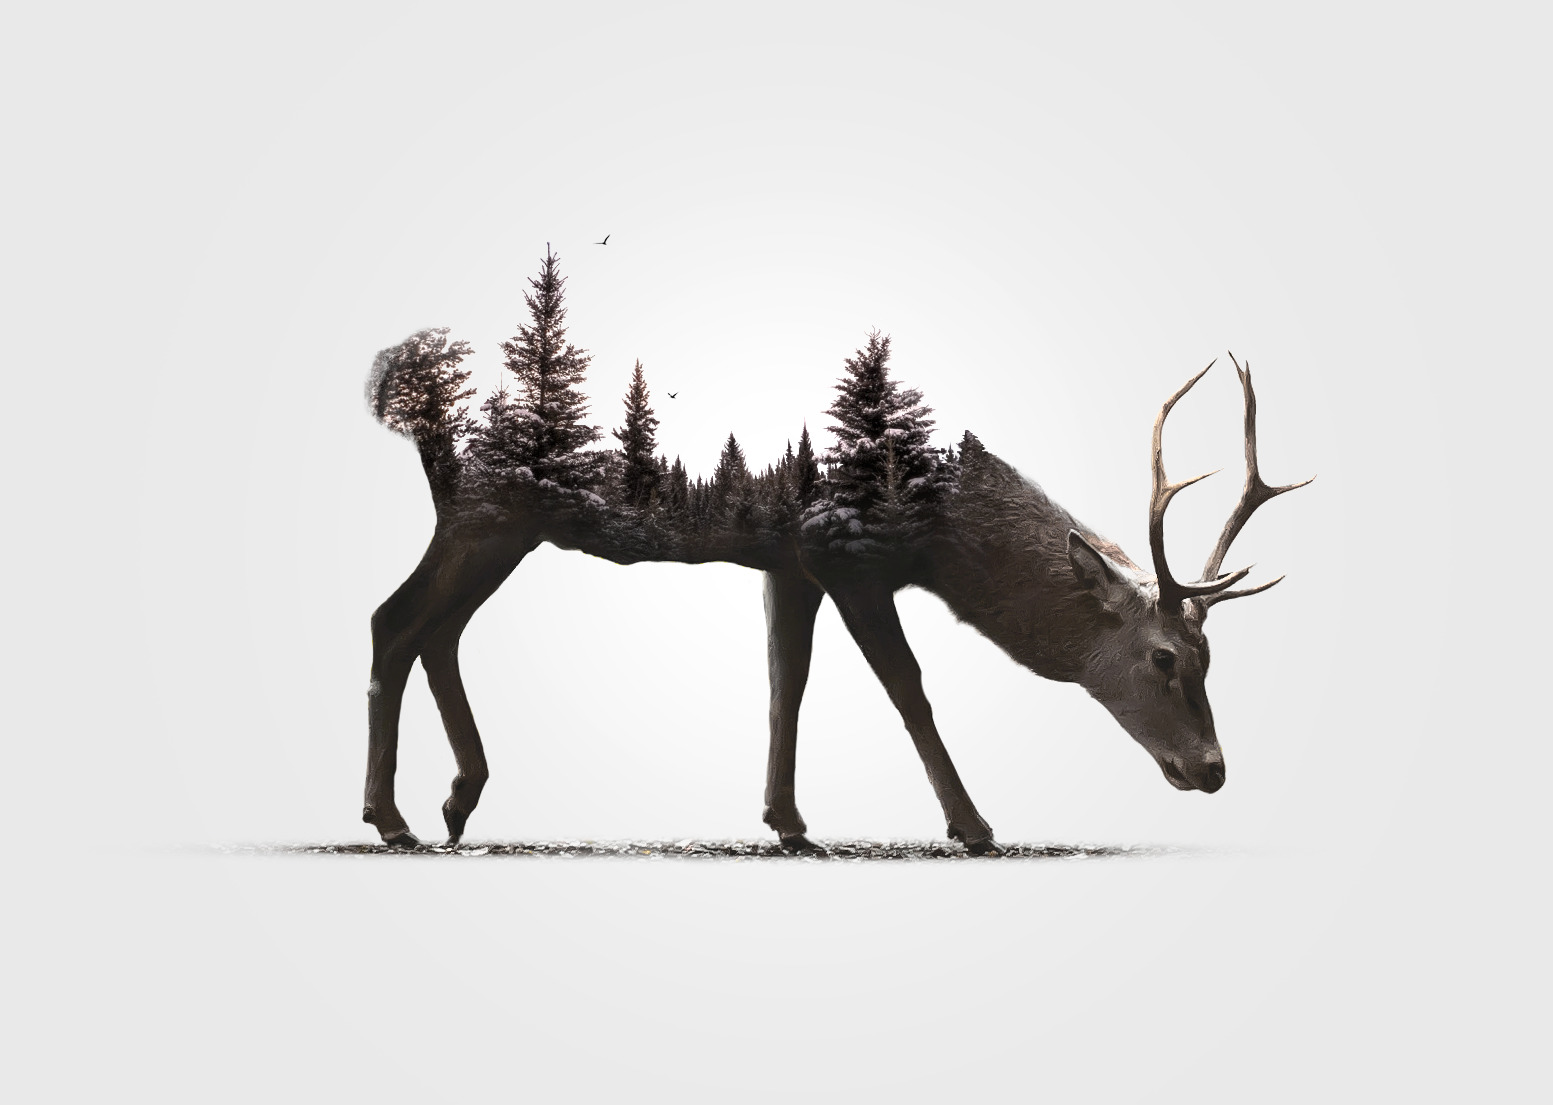 digital art, Animals, Simple background, Deer, White background, Antlers, Double exposure, Nature, Trees, Forest, Snow, Pine trees, Birds Wallpaper